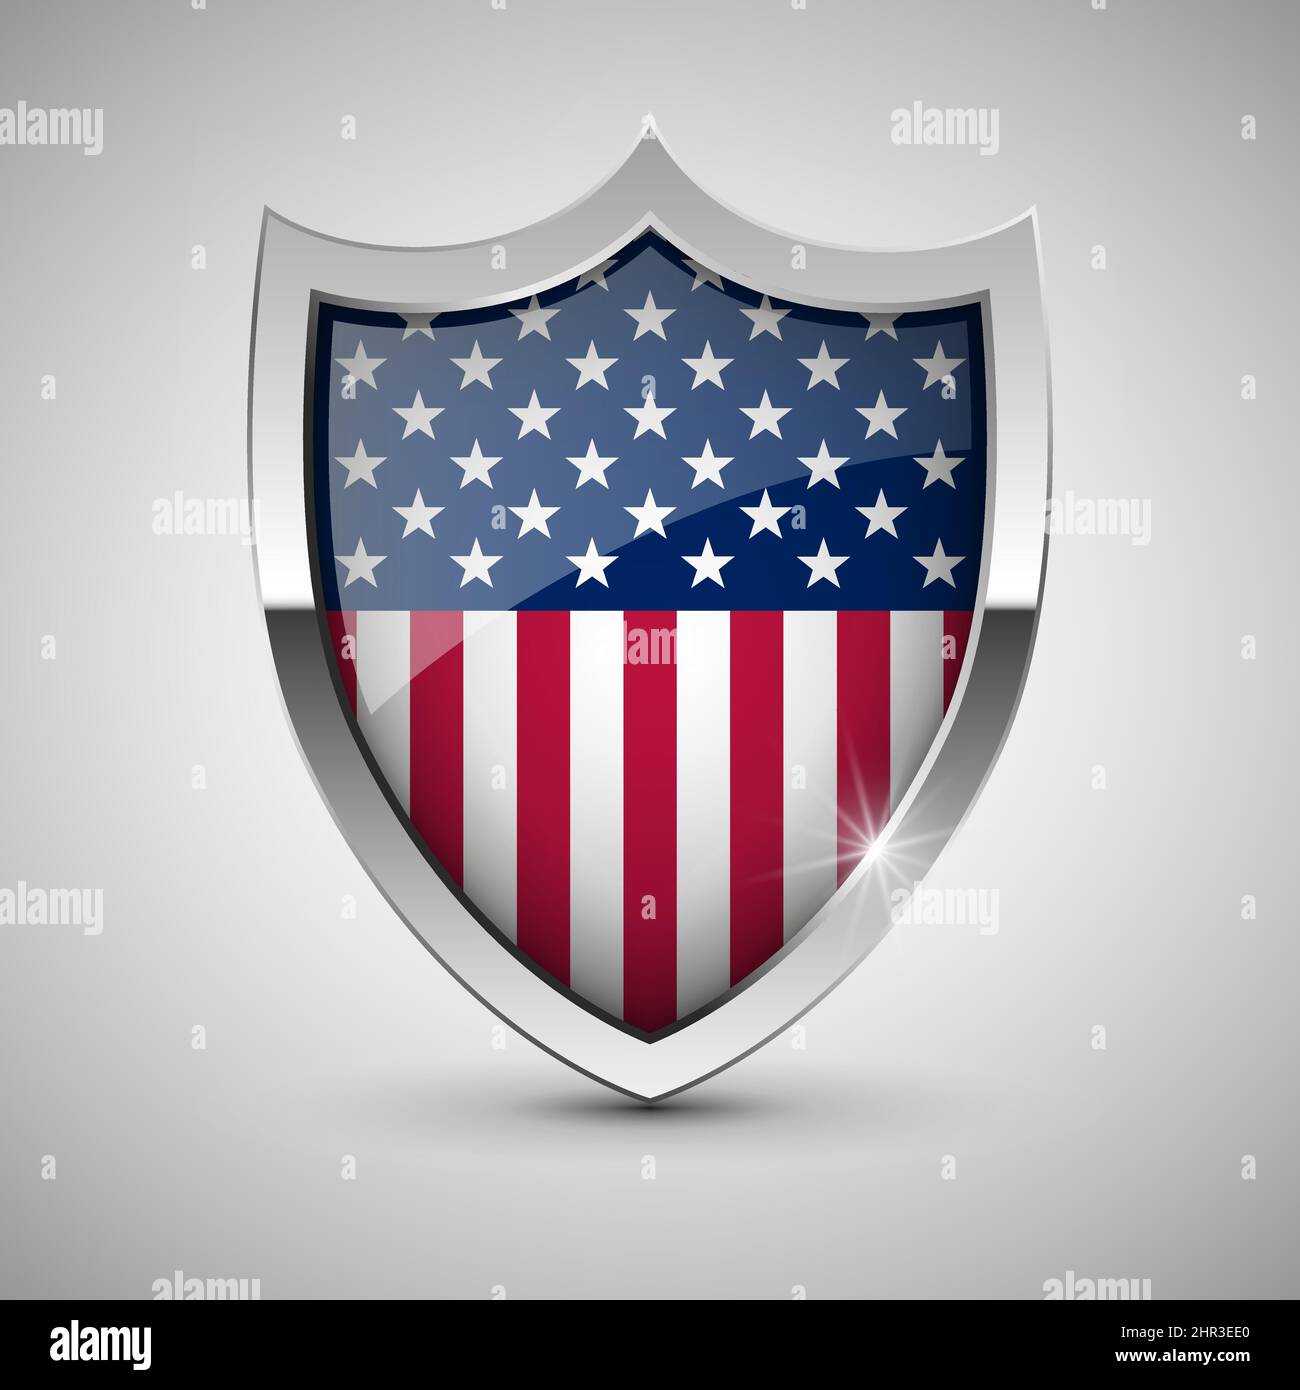 EPS10 Vector Patriotic shield with flag of Usa. An element of impact for the use you want to make of it. Stock Vector